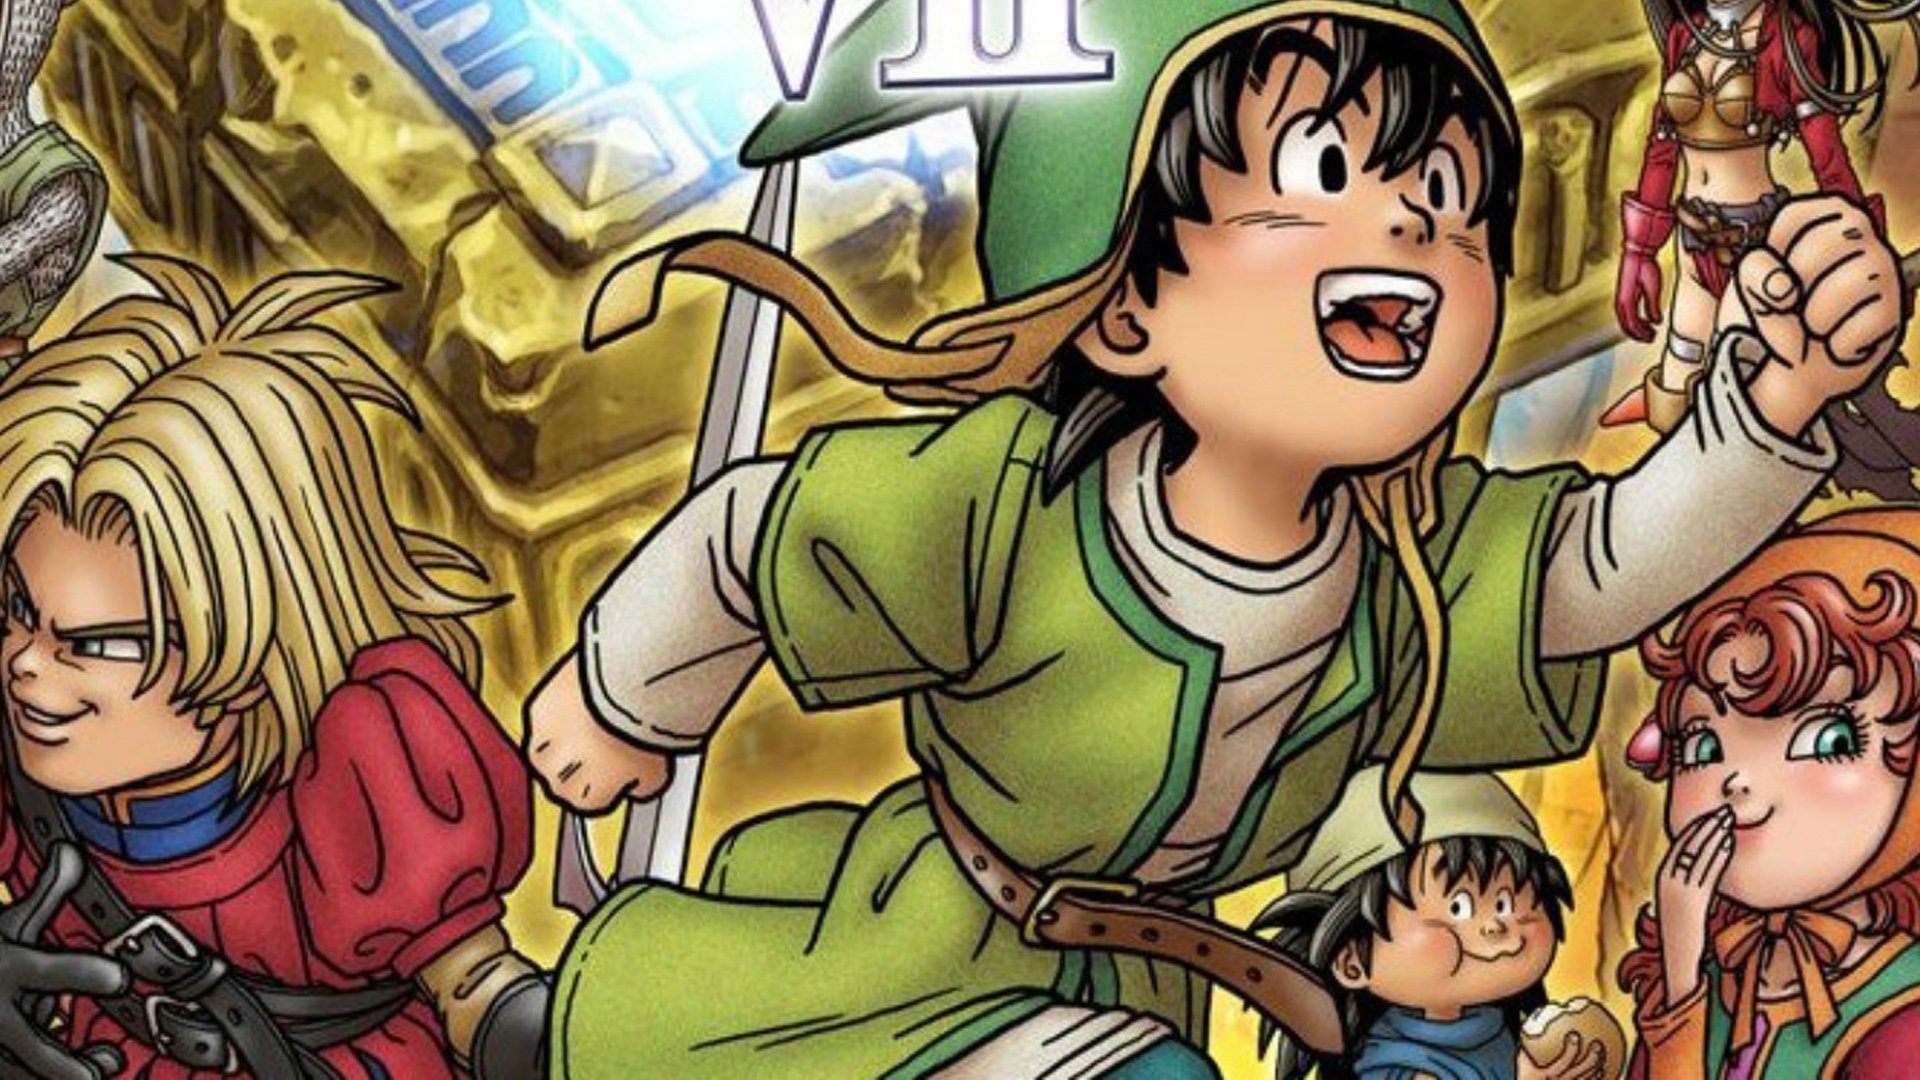 New Dragon Quest Vii Trailer Shows Off The Haven Nintendo Wire